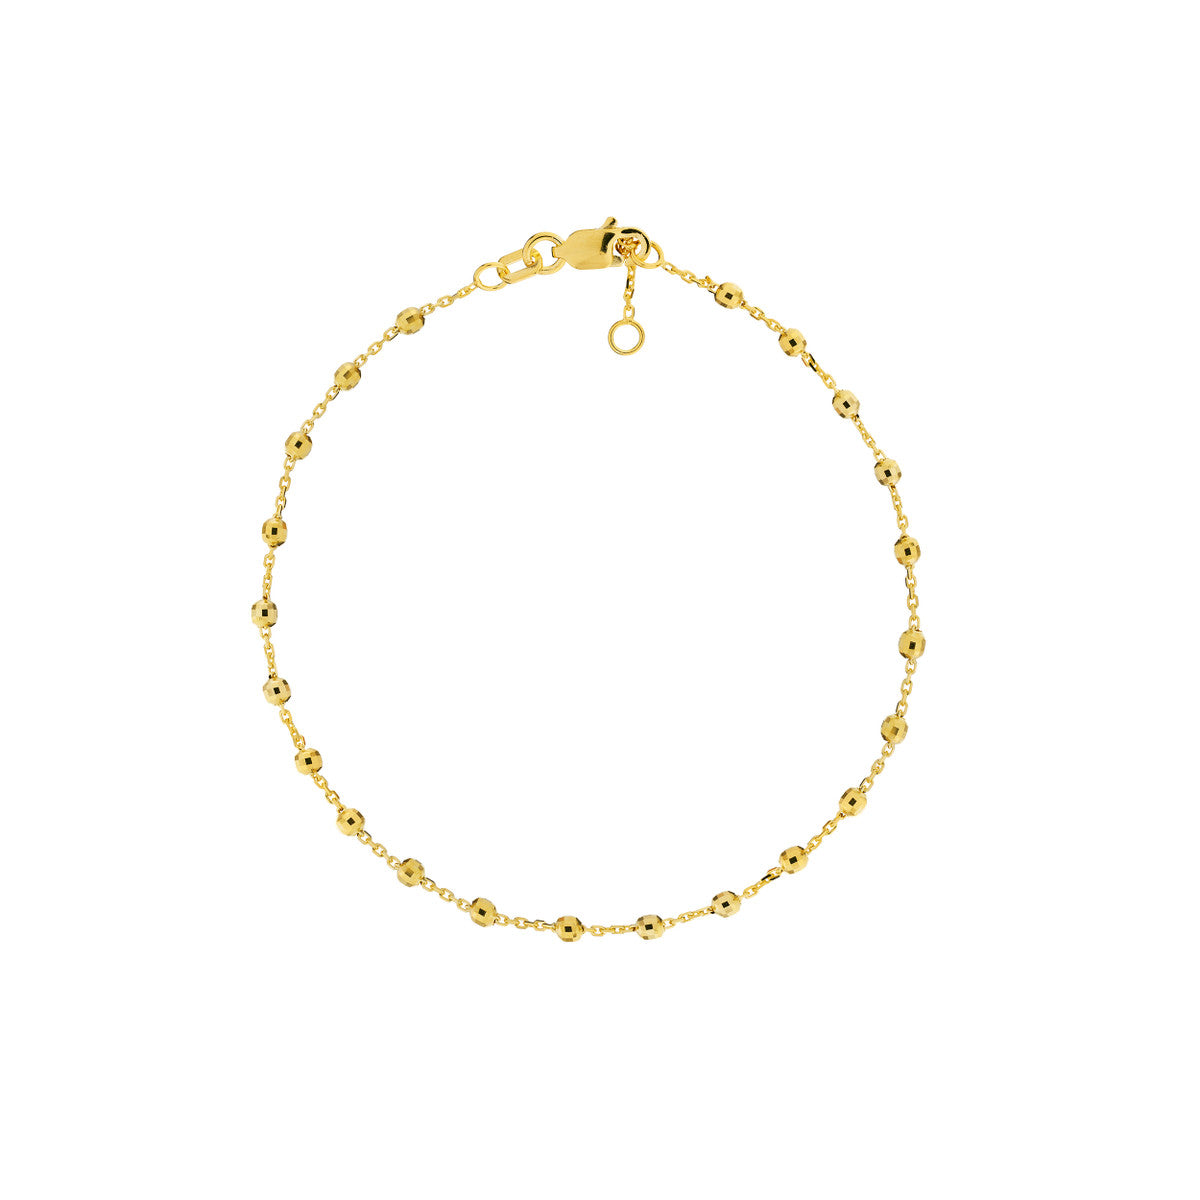 Bead Station Bracelet in Yellow Gold